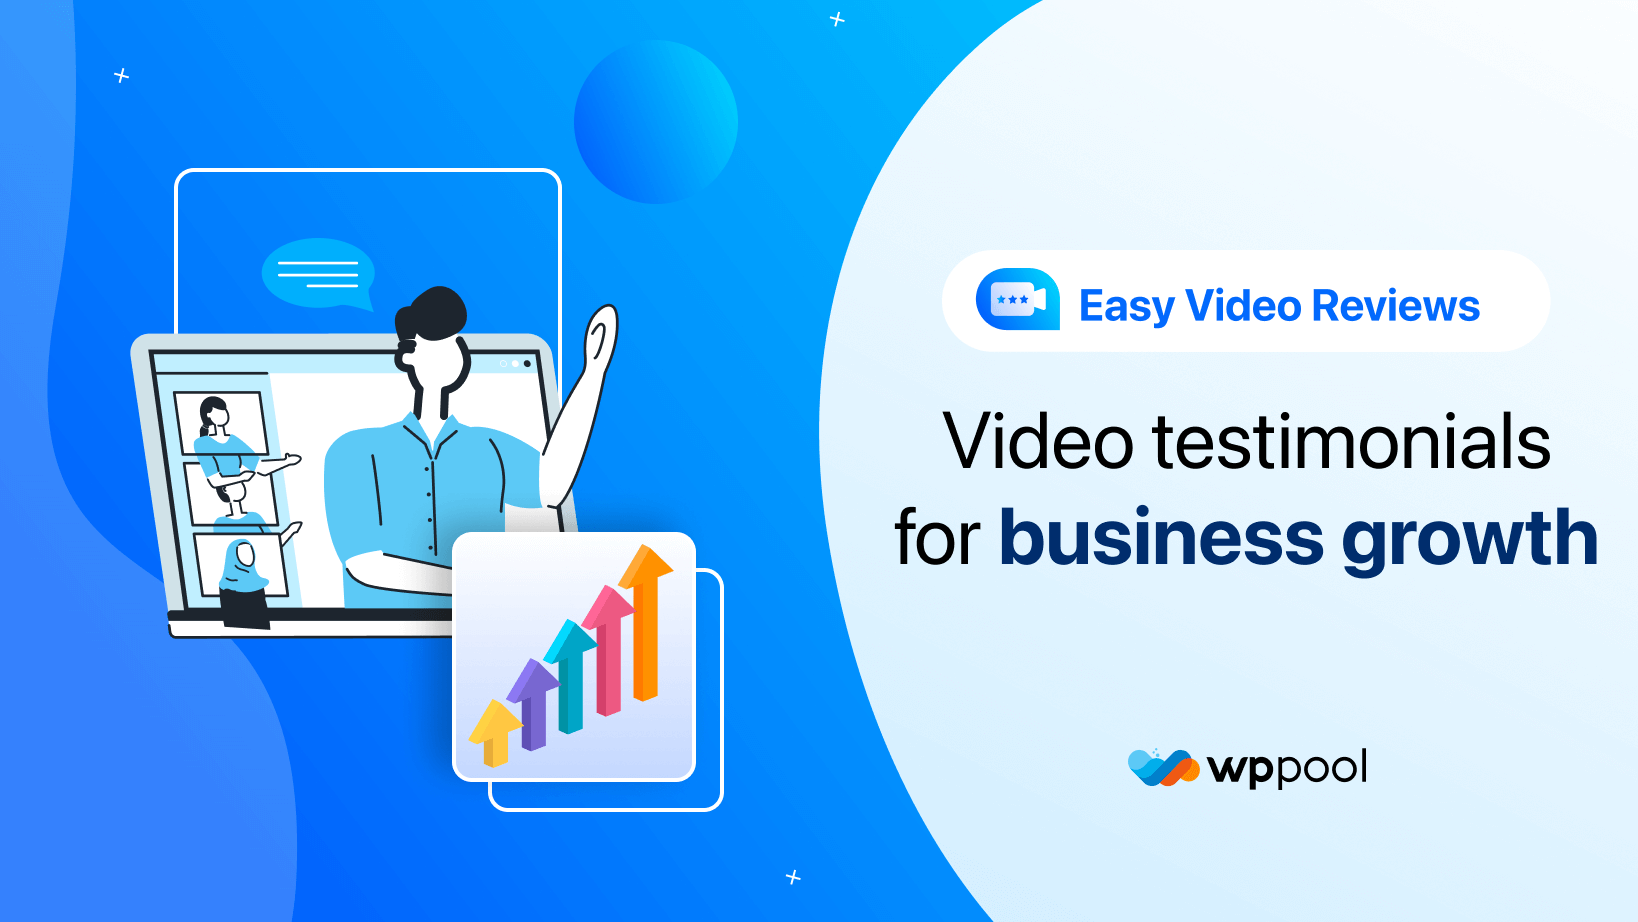 Easy Video Reviews - Video testimonials for business growth